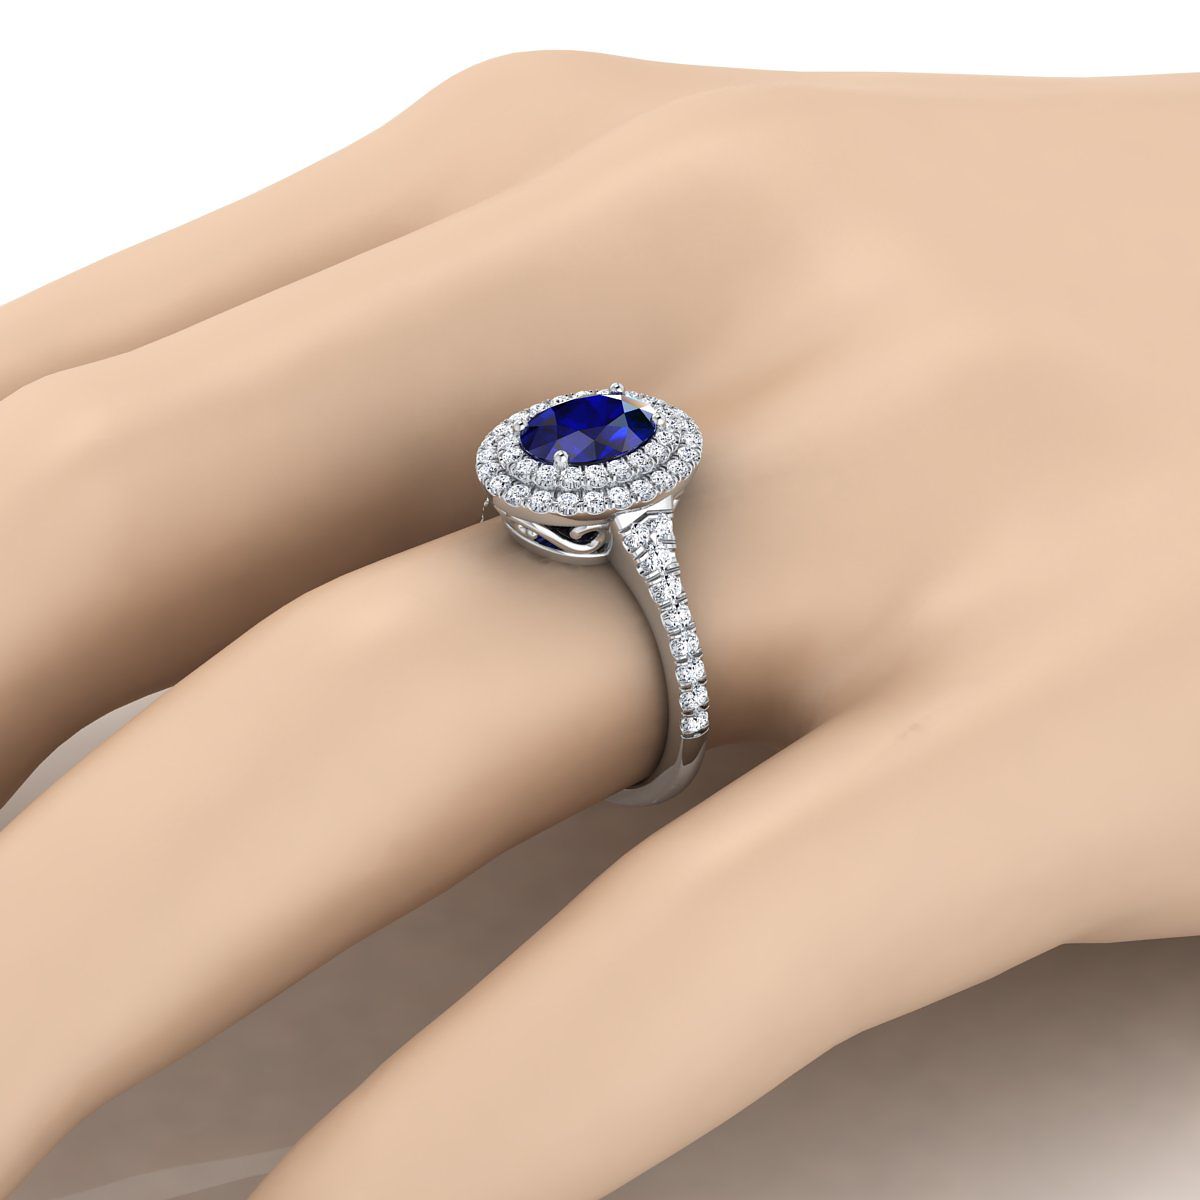 18K White Gold Oval Sapphire Double Halo with Scalloped Pavé Diamond Engagement Ring -1/2ctw